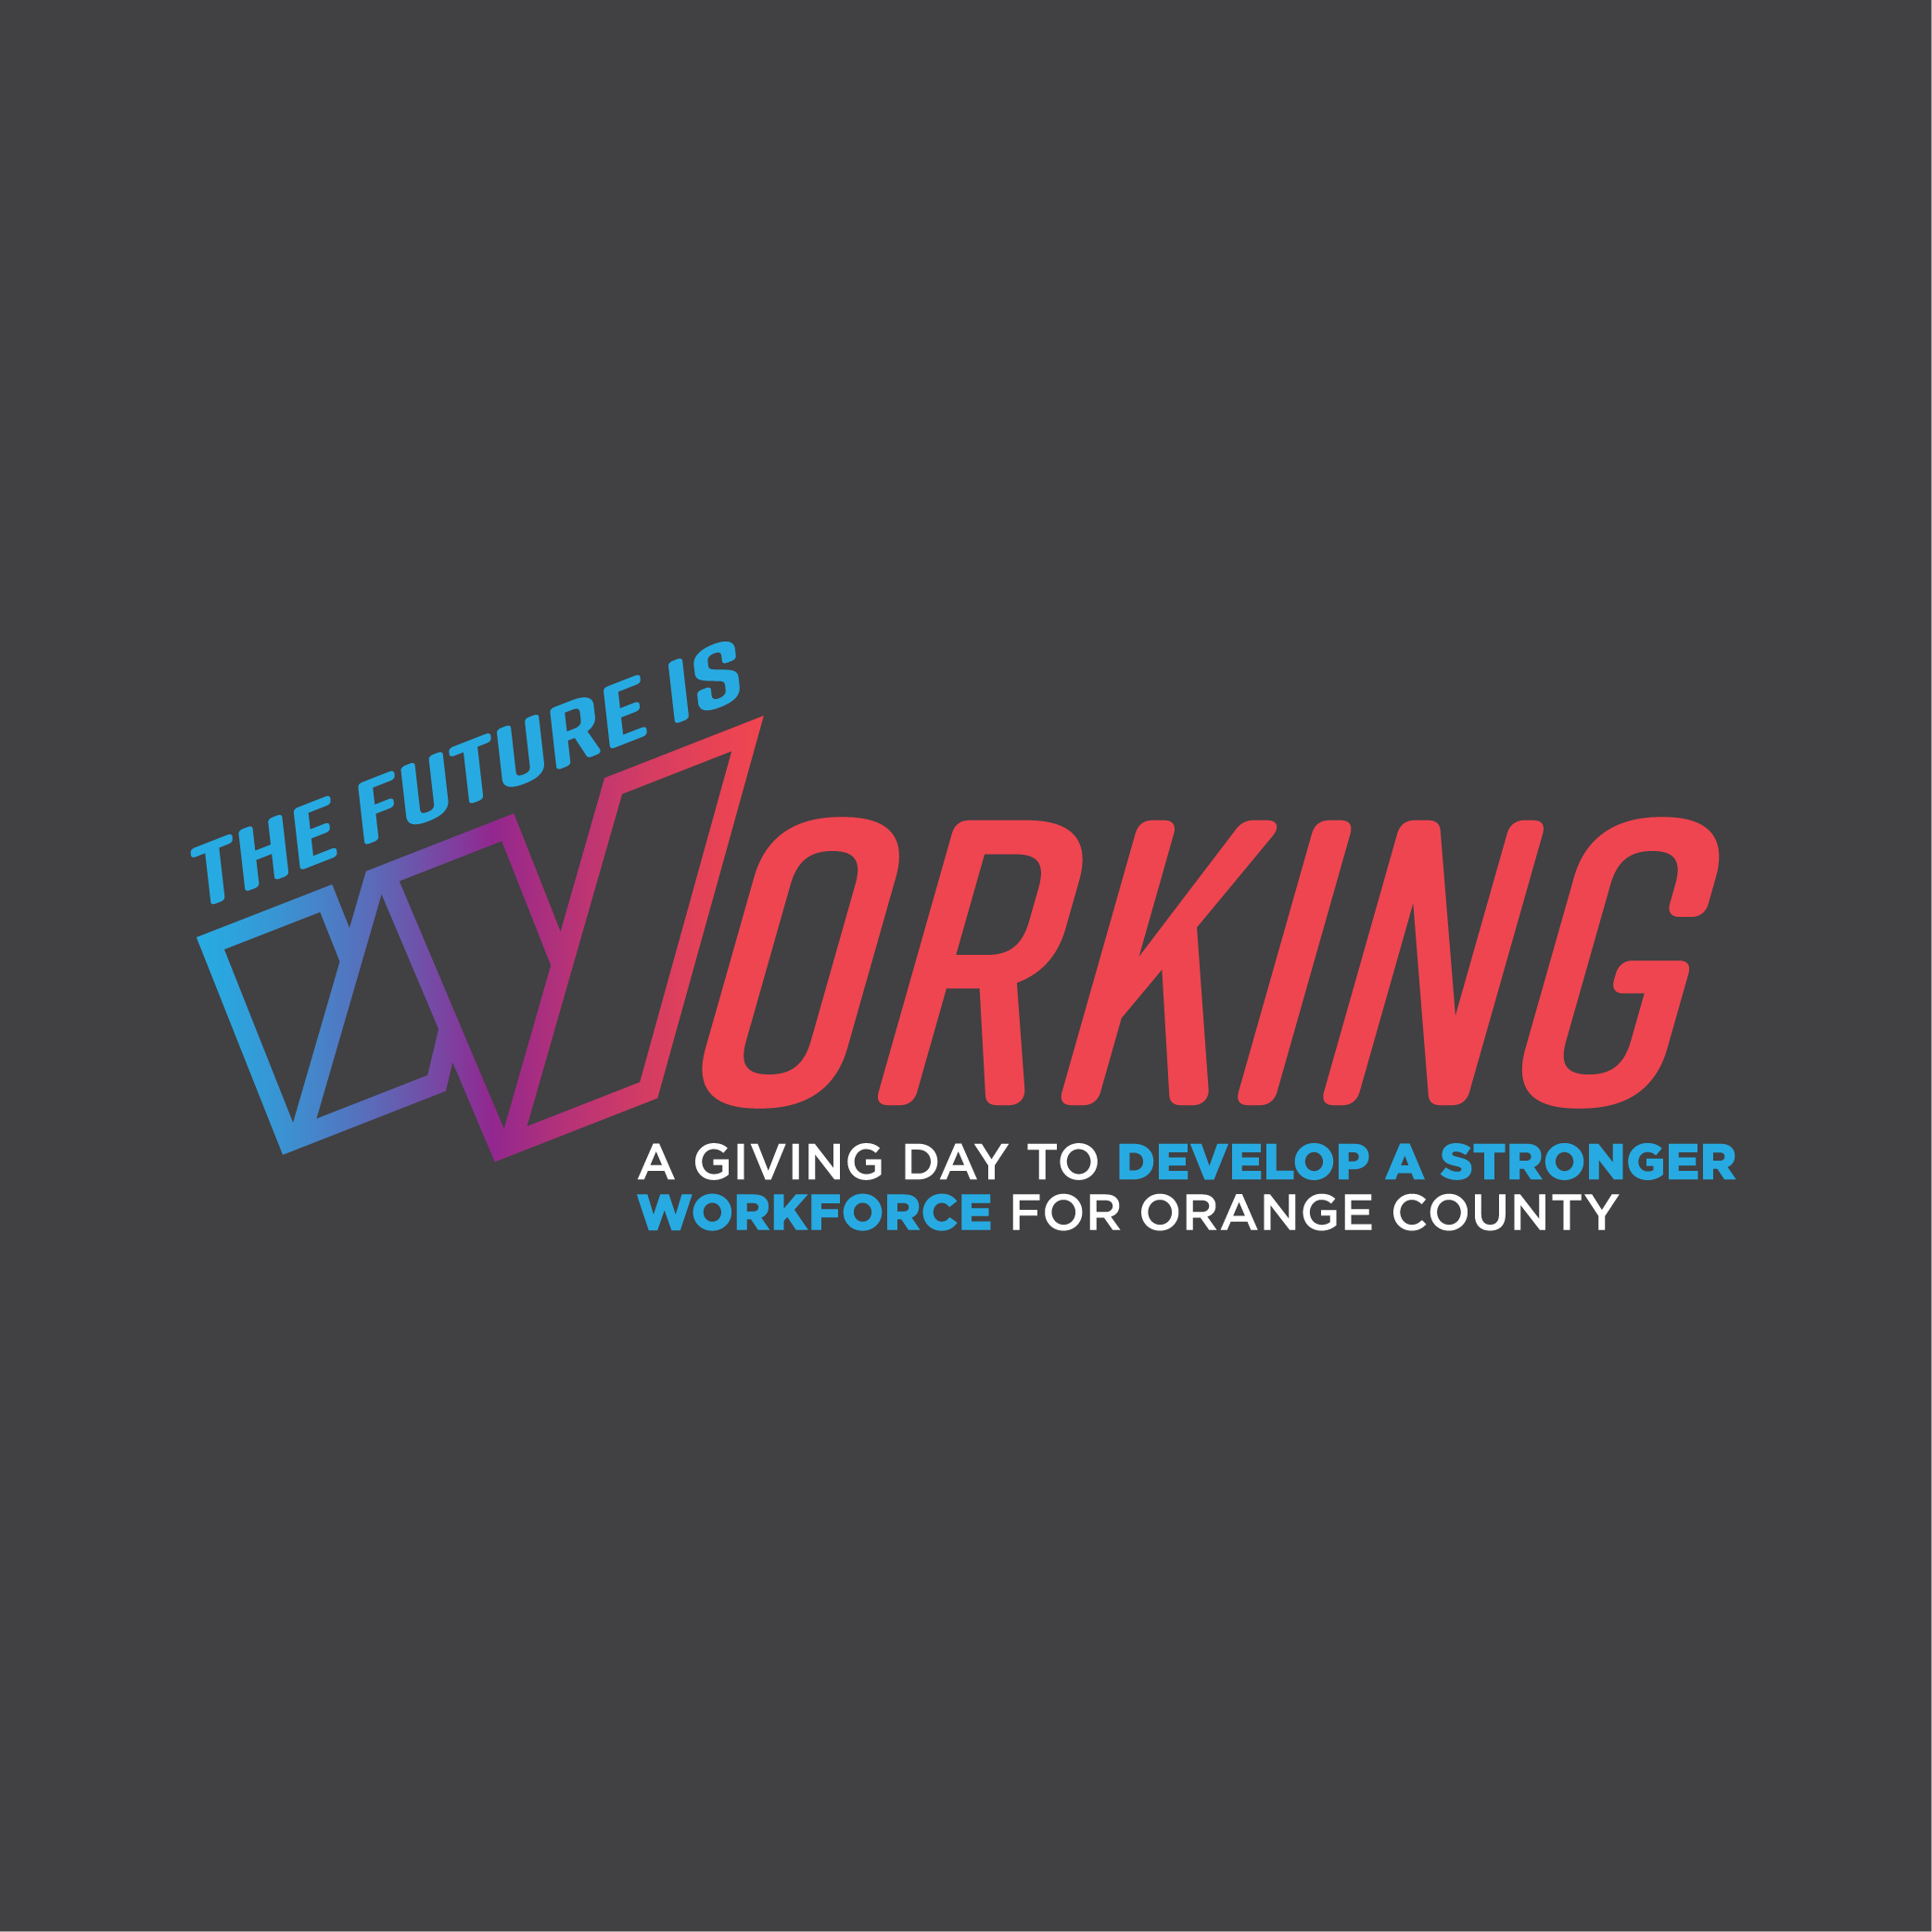 $479,791 Raised in 24 Hours to Build Pathways to Success in the Orange County Workforce During The Future is Working Giving Day